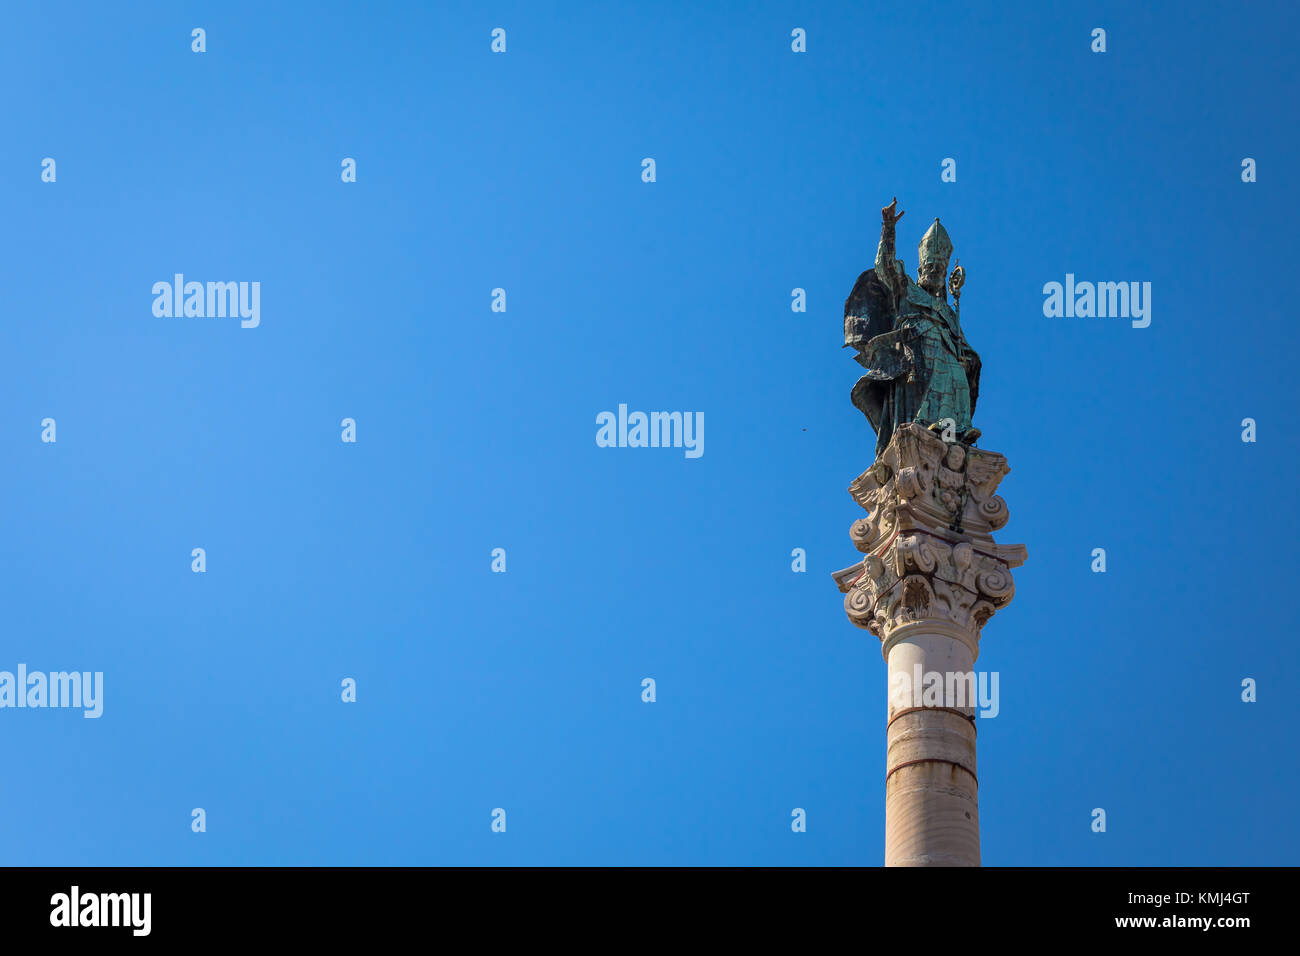 The symbol of Lecce town (Italy): Saint Oronzo (Sant'Oronzo) posed on the column at the center of the main town Square. Blue backgroud with copy space Stock Photo